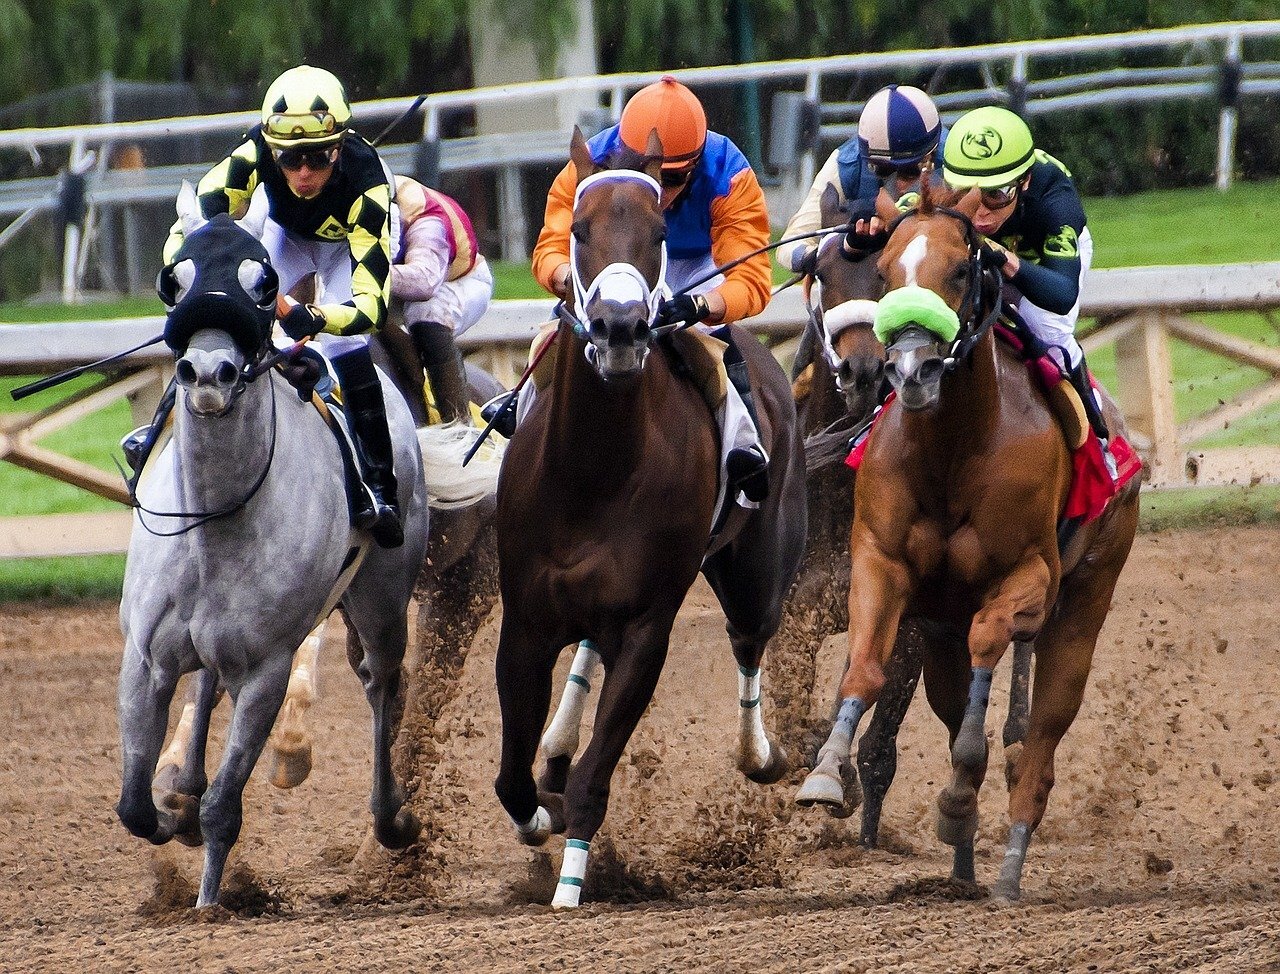 horses racing on a race track